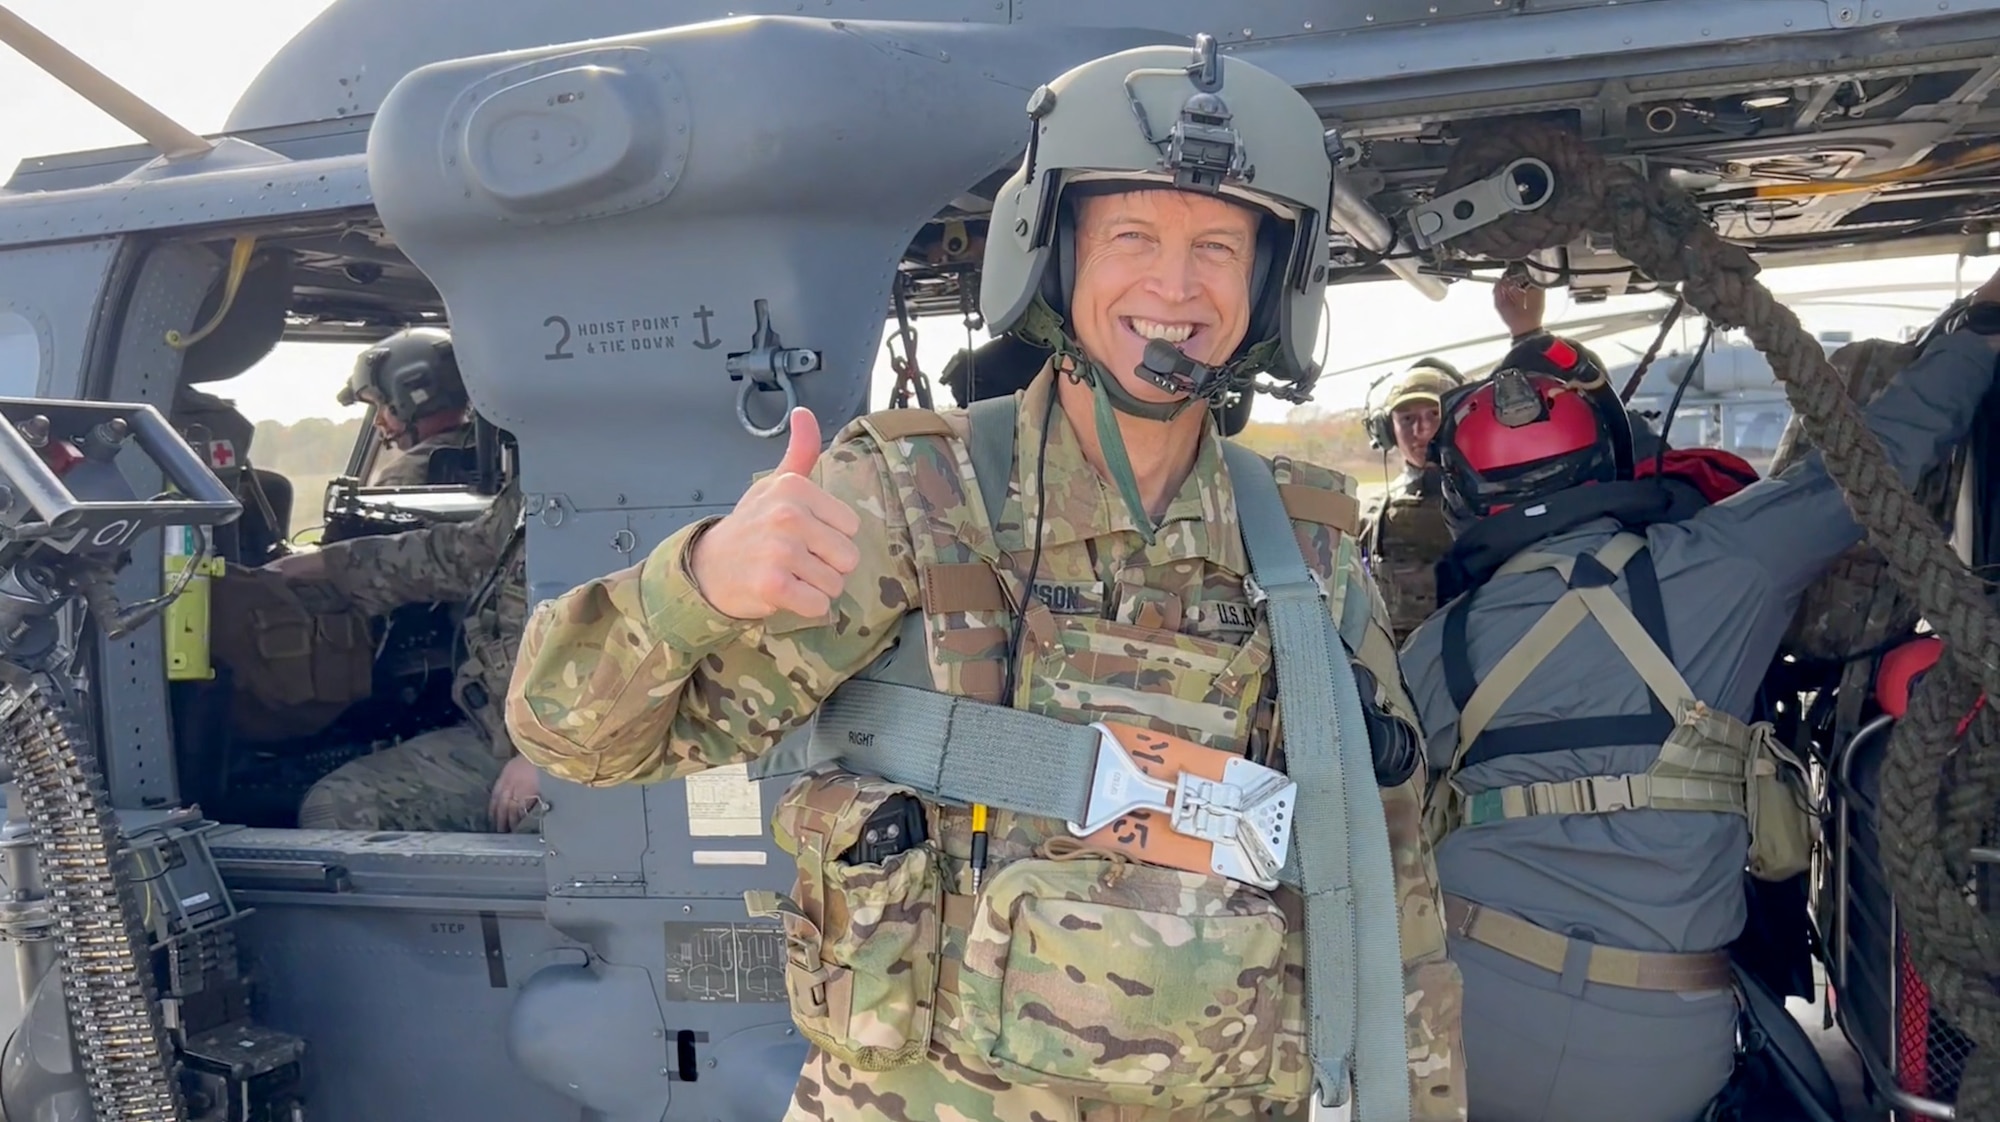 Army Gen. Daniel R. Hokanson, chief of the National Guard Bureau, gives a thumbs up as he prepares to fly in an HH-60G Pave Hawk helicopter during his visit with the New York Air National Guard’s 106th Rescue Wing at F.S. Gabreski Air National Guard Base in Westhampton Beach, New York, Nov. 5, 2022. Hokanson has over 2600 flight hours, including 50 combat hours, and has flown the AH-64, OH-58, TH-55, UH-1 and UH-60.